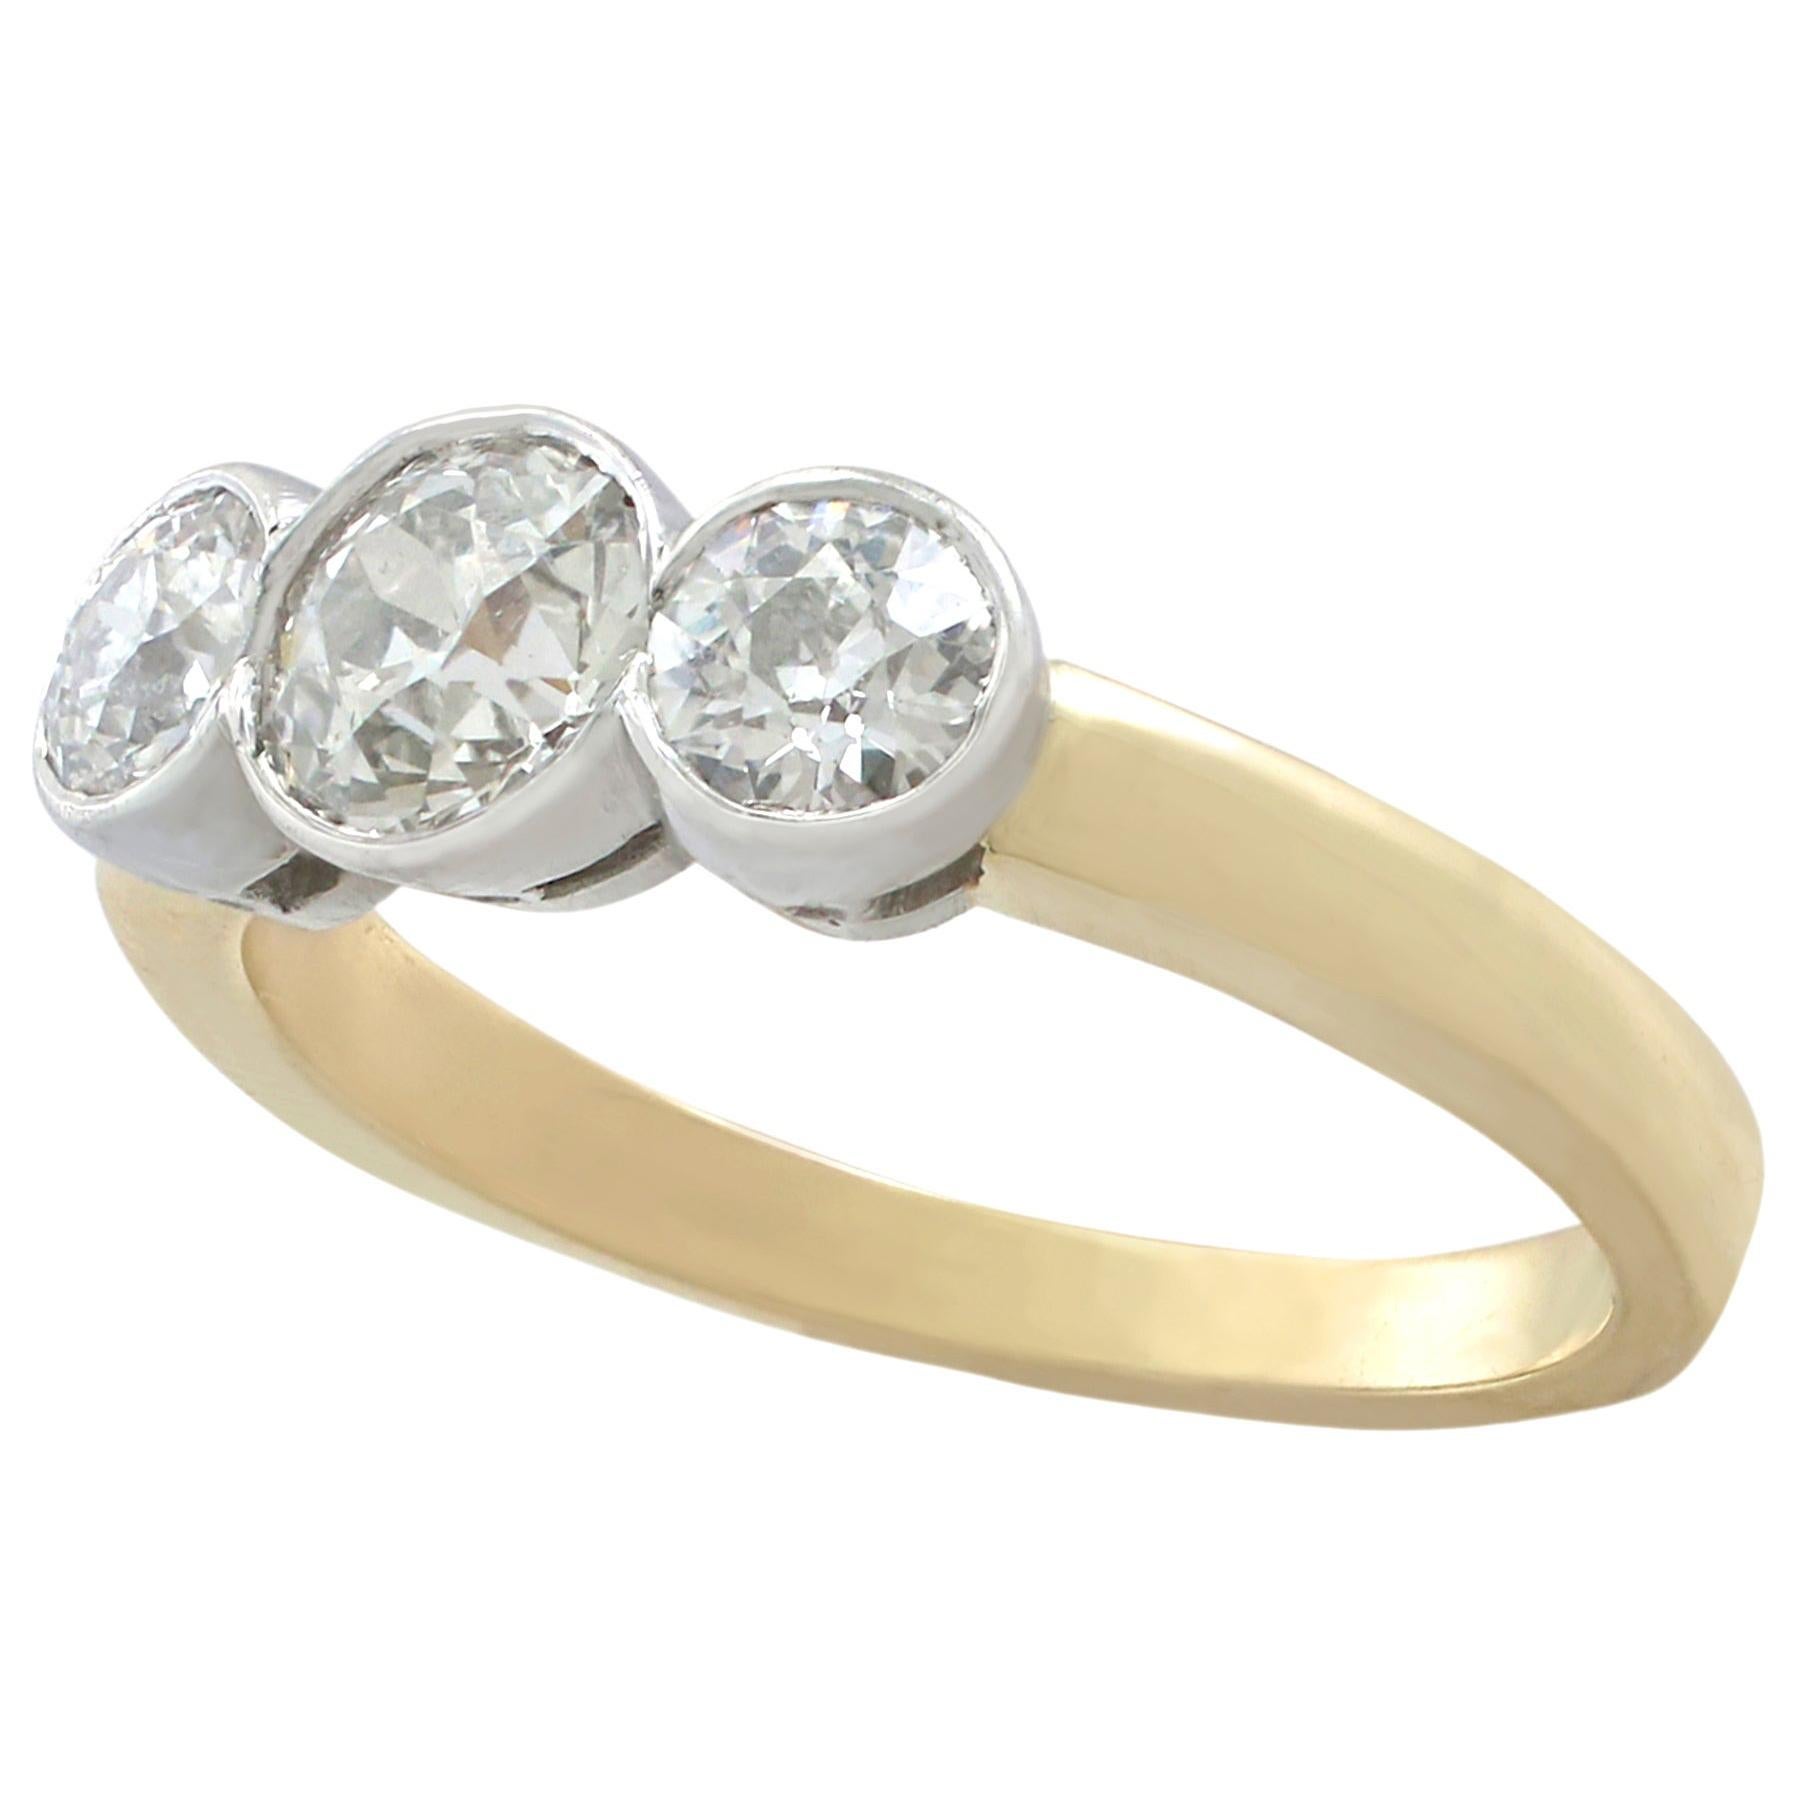 Antique and Contemporary 1.69 Carat Diamond and Yellow Gold Trilogy Ring